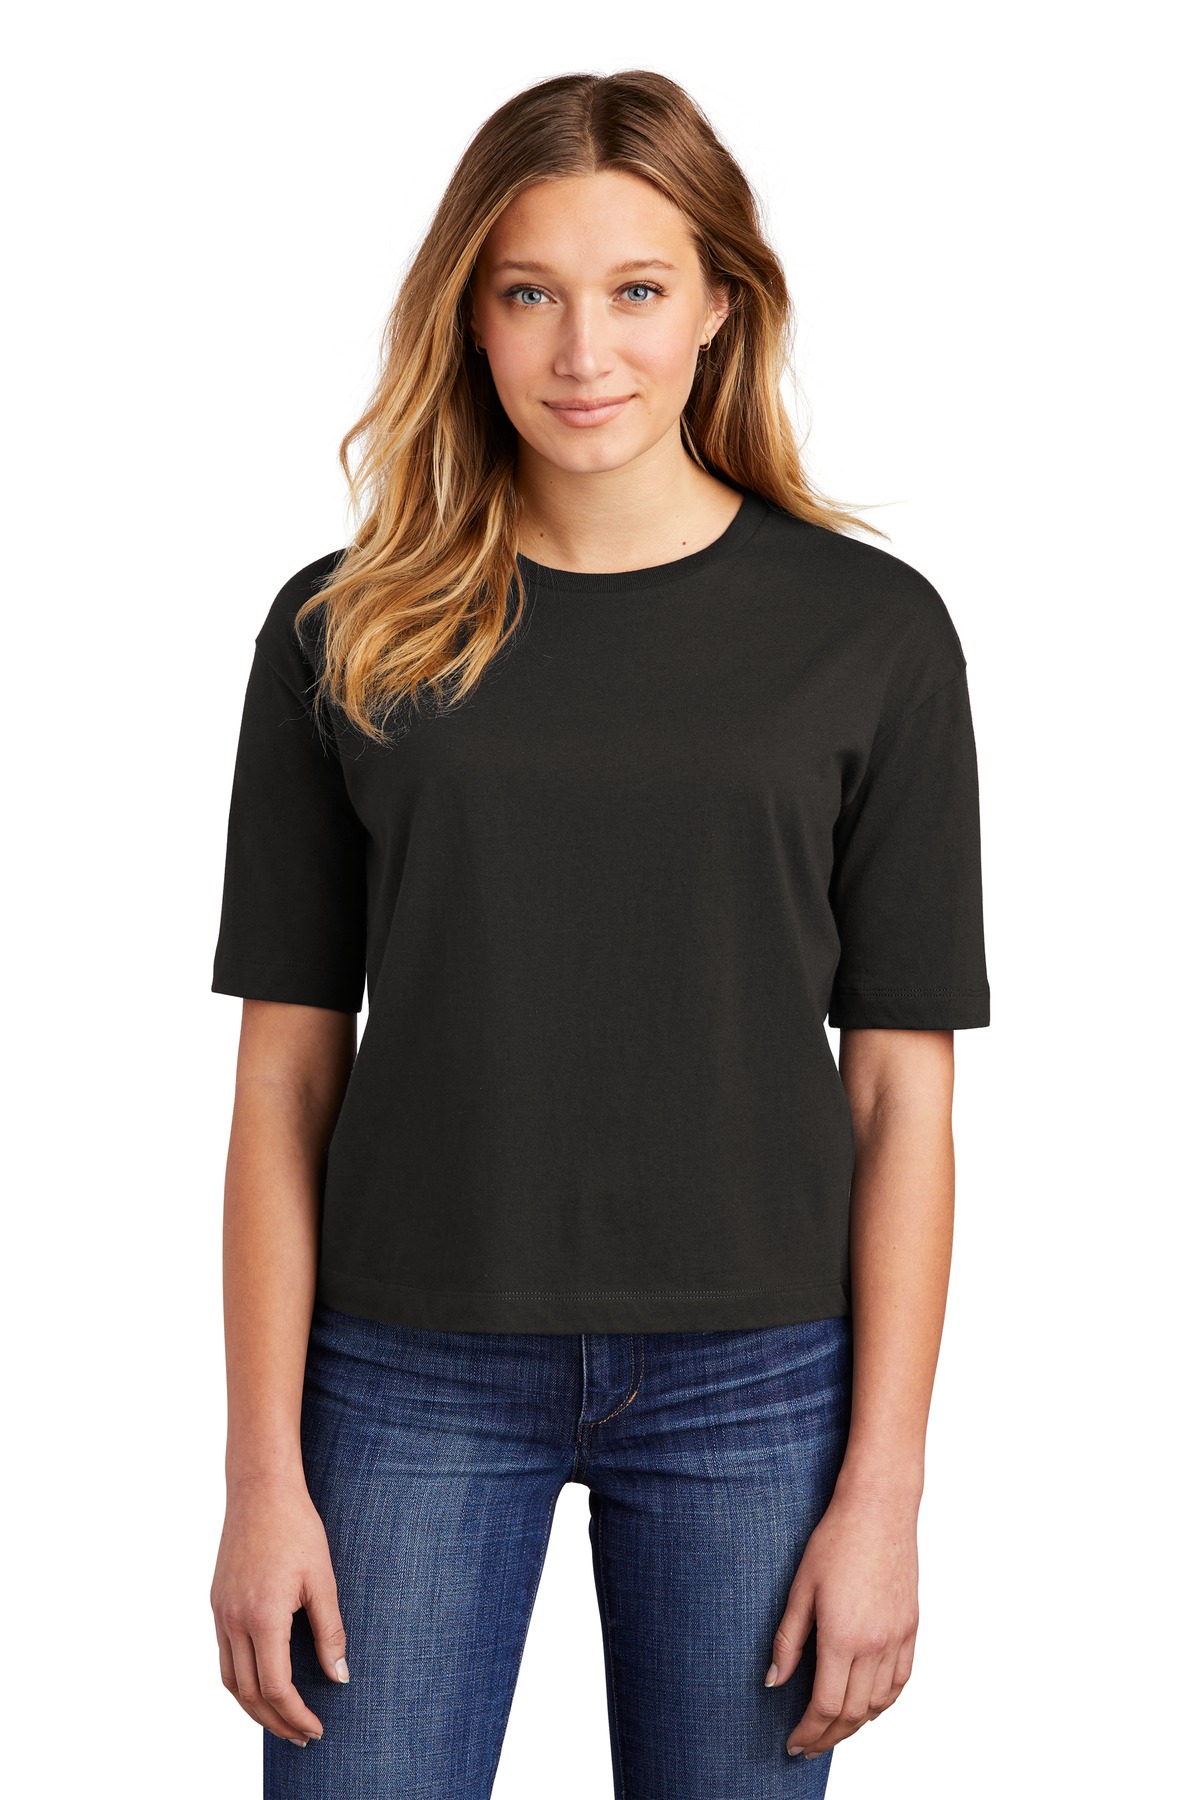 District Women's V.I.T. Boxy Tee DT6402